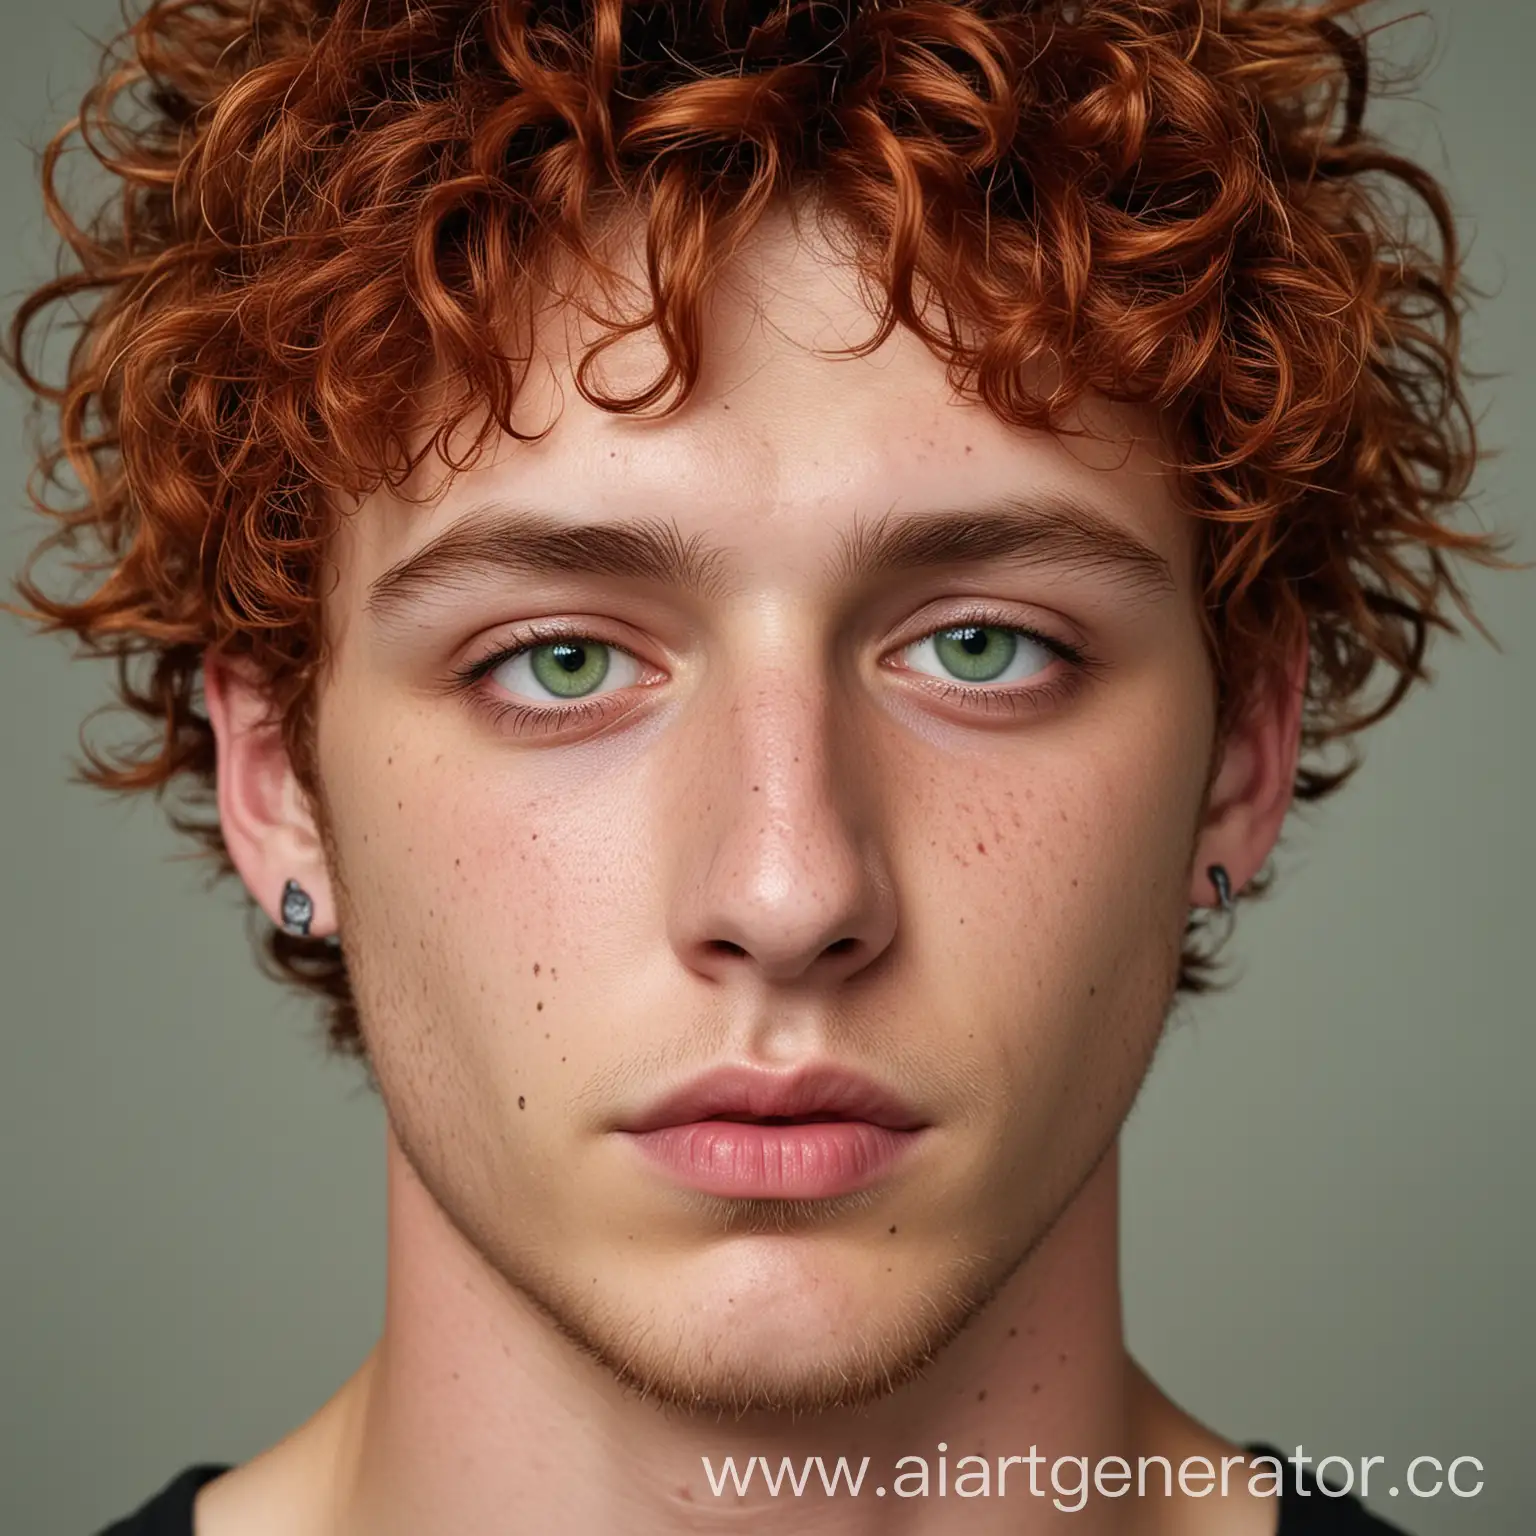 Young-Man-with-Curly-Red-Hair-and-Green-Eyes-Featuring-Tattoos